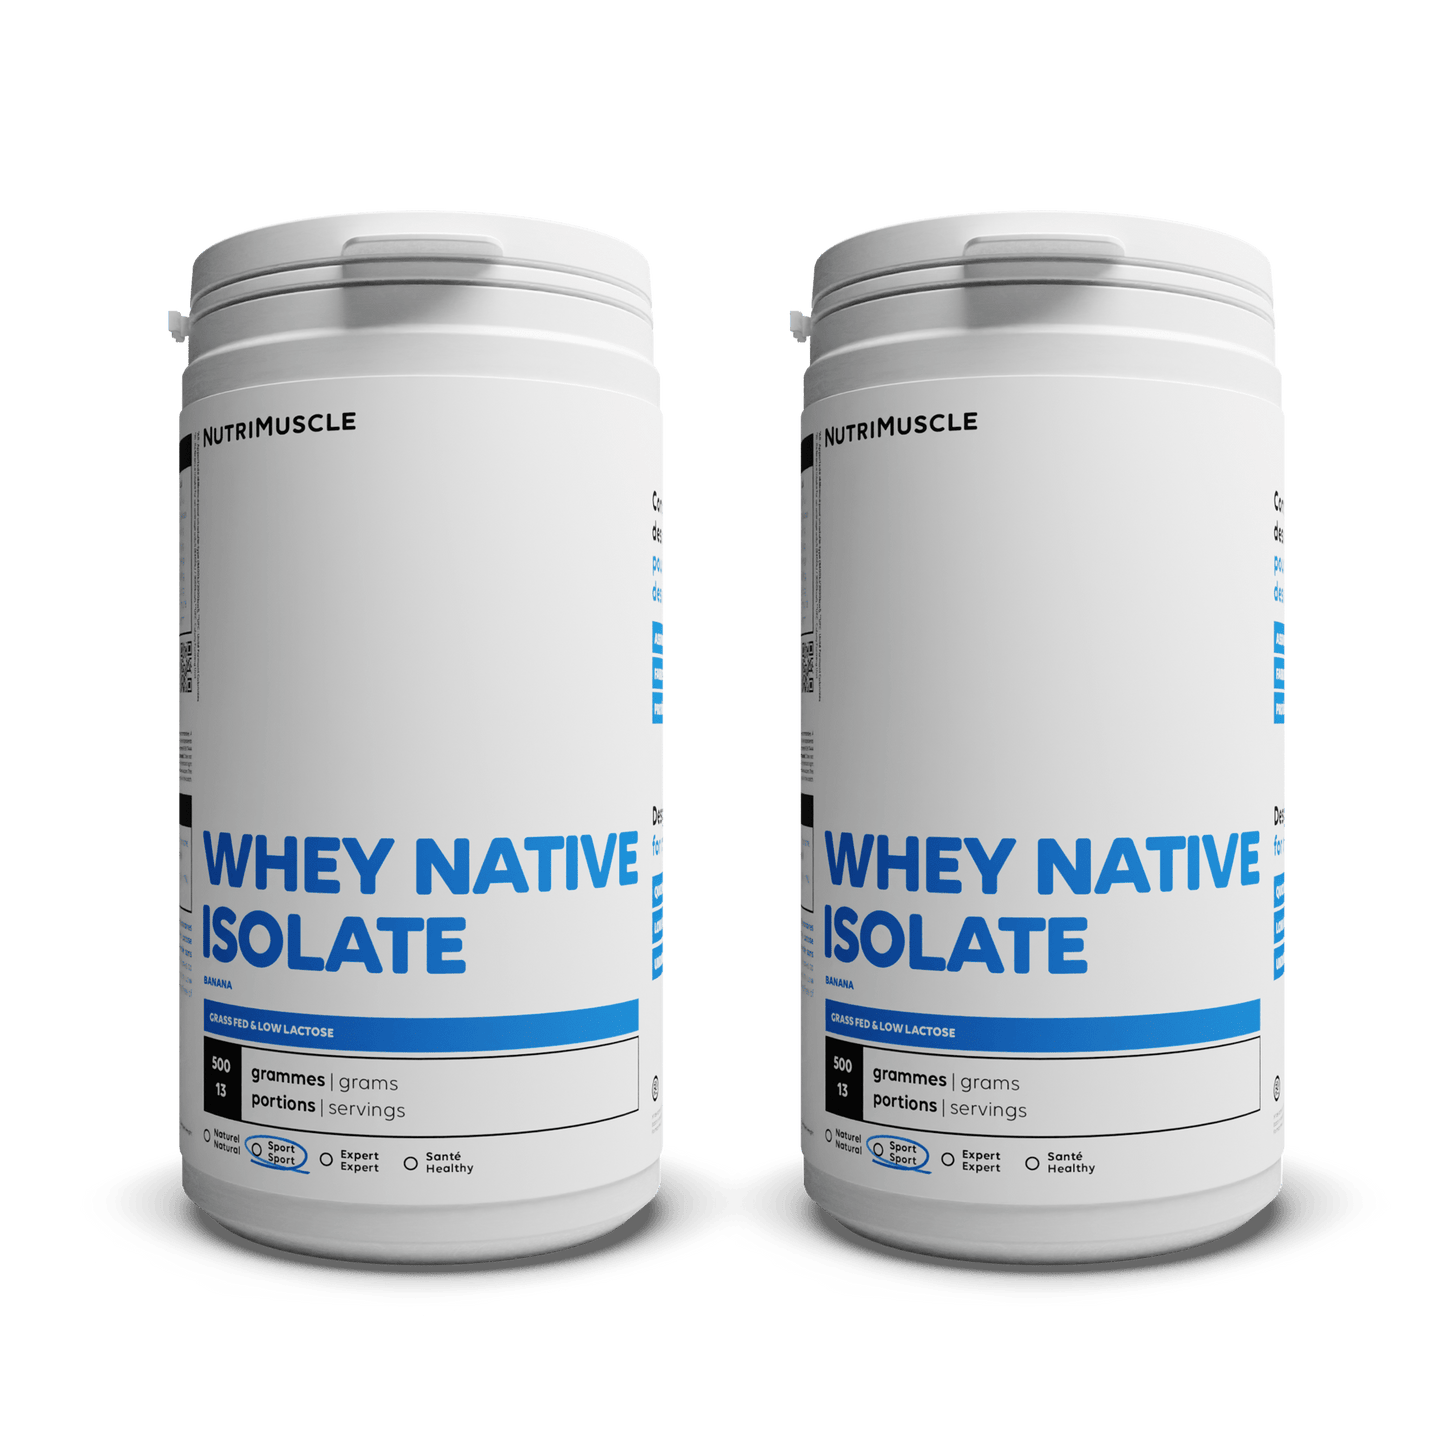 Nutrimuscle Protéines Banane / 1.00 kg Whey Native Isolate (Low lactose)